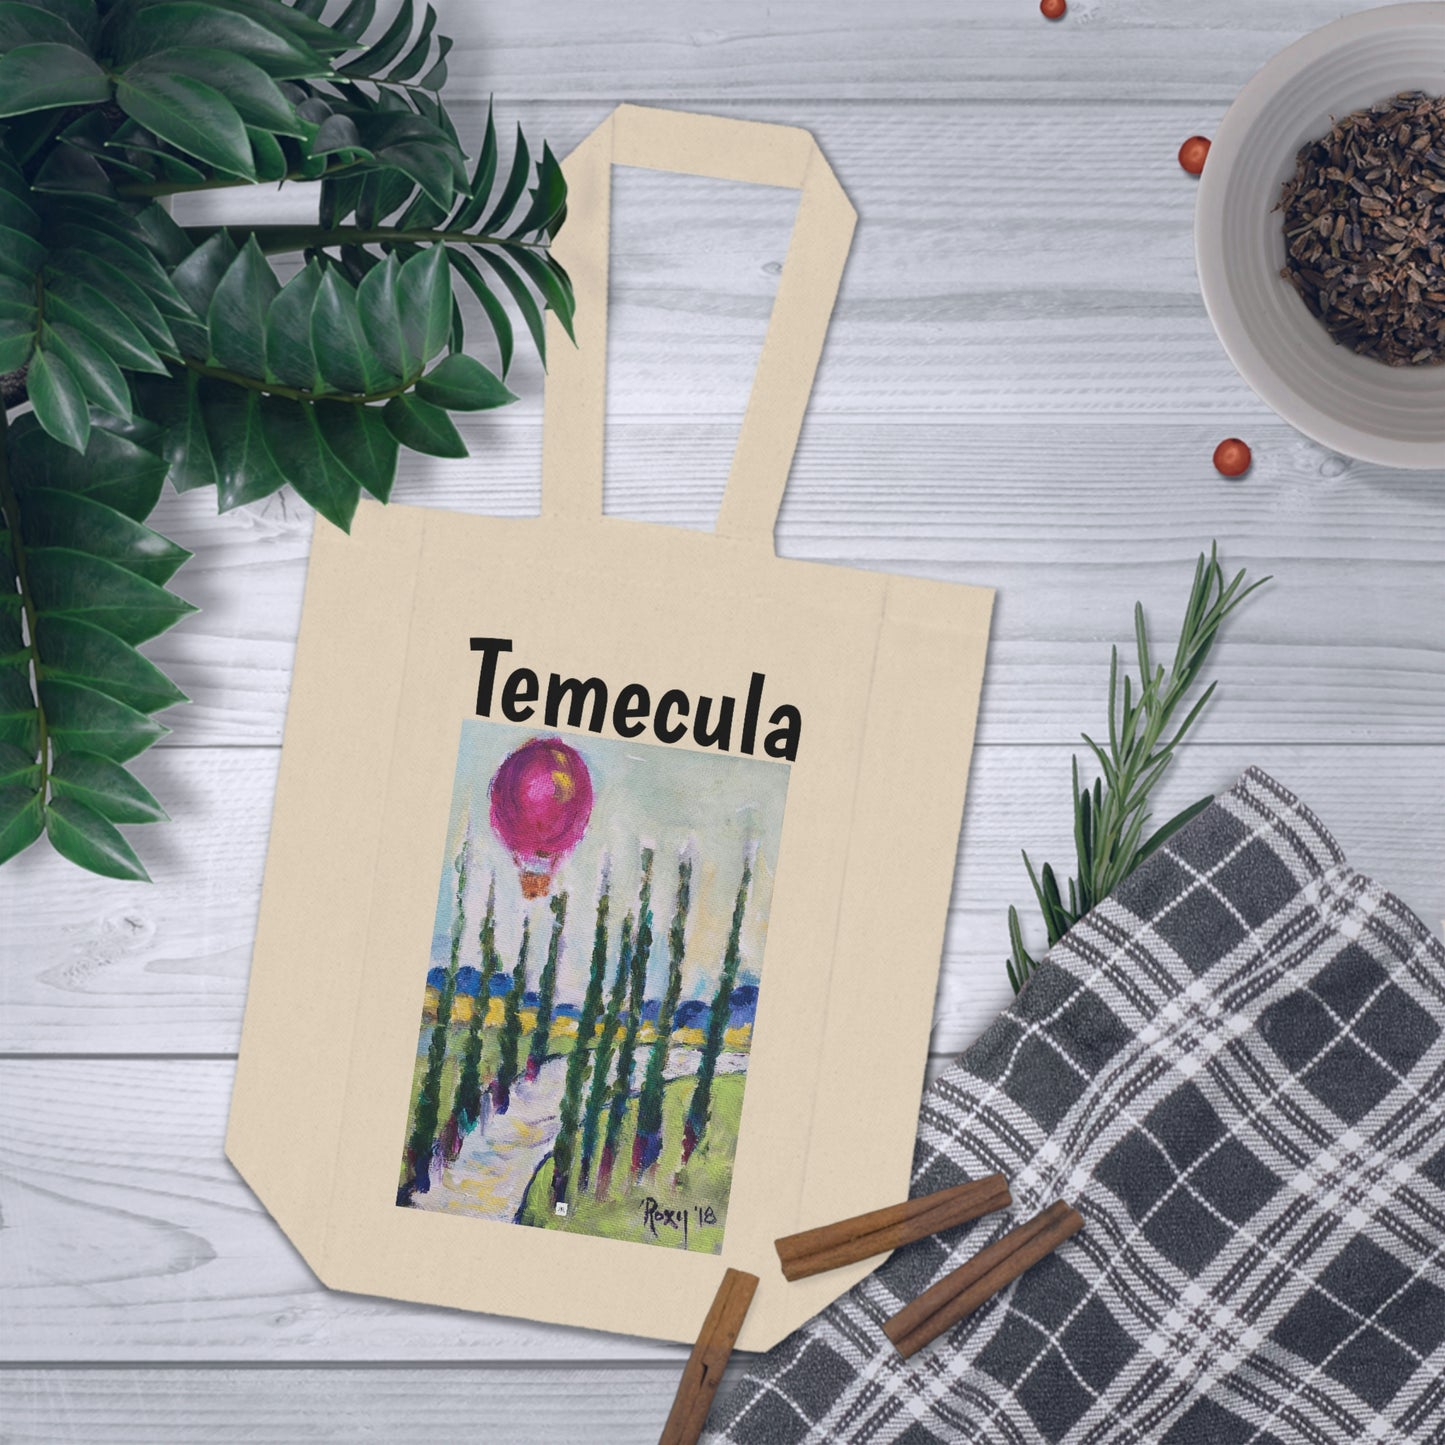 Temecula Double Wine Tote Bag featuring "Good morning Wine Country" painting